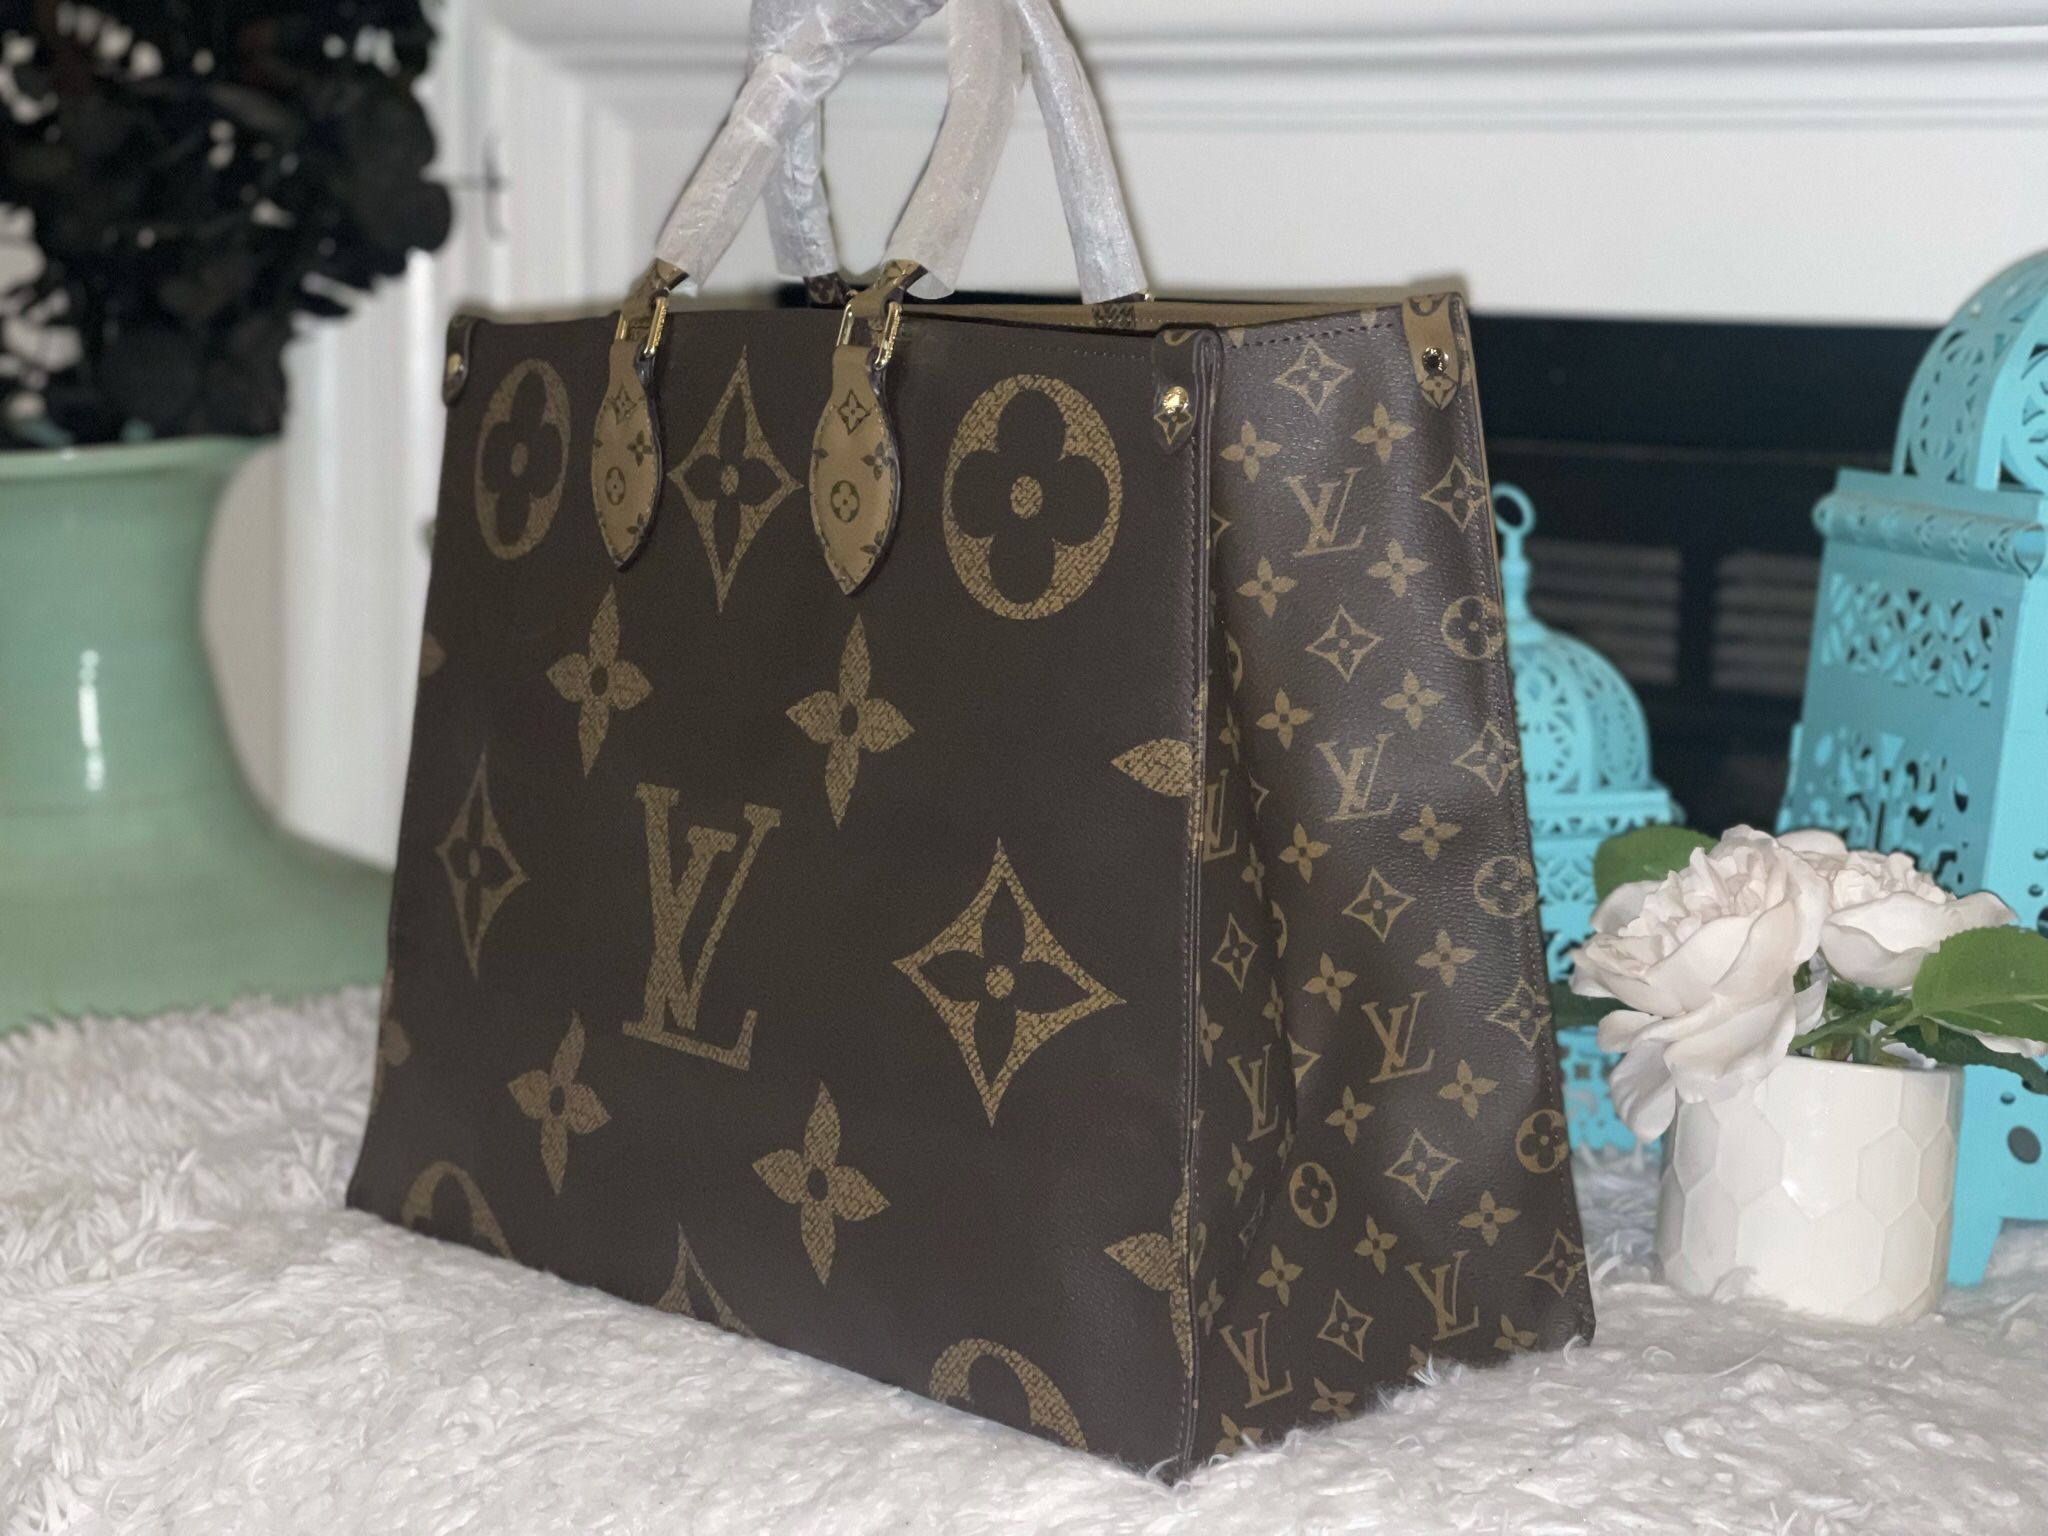 M44576 Onthego Tote Bag Lv for Sale in Los Angeles, CA - OfferUp